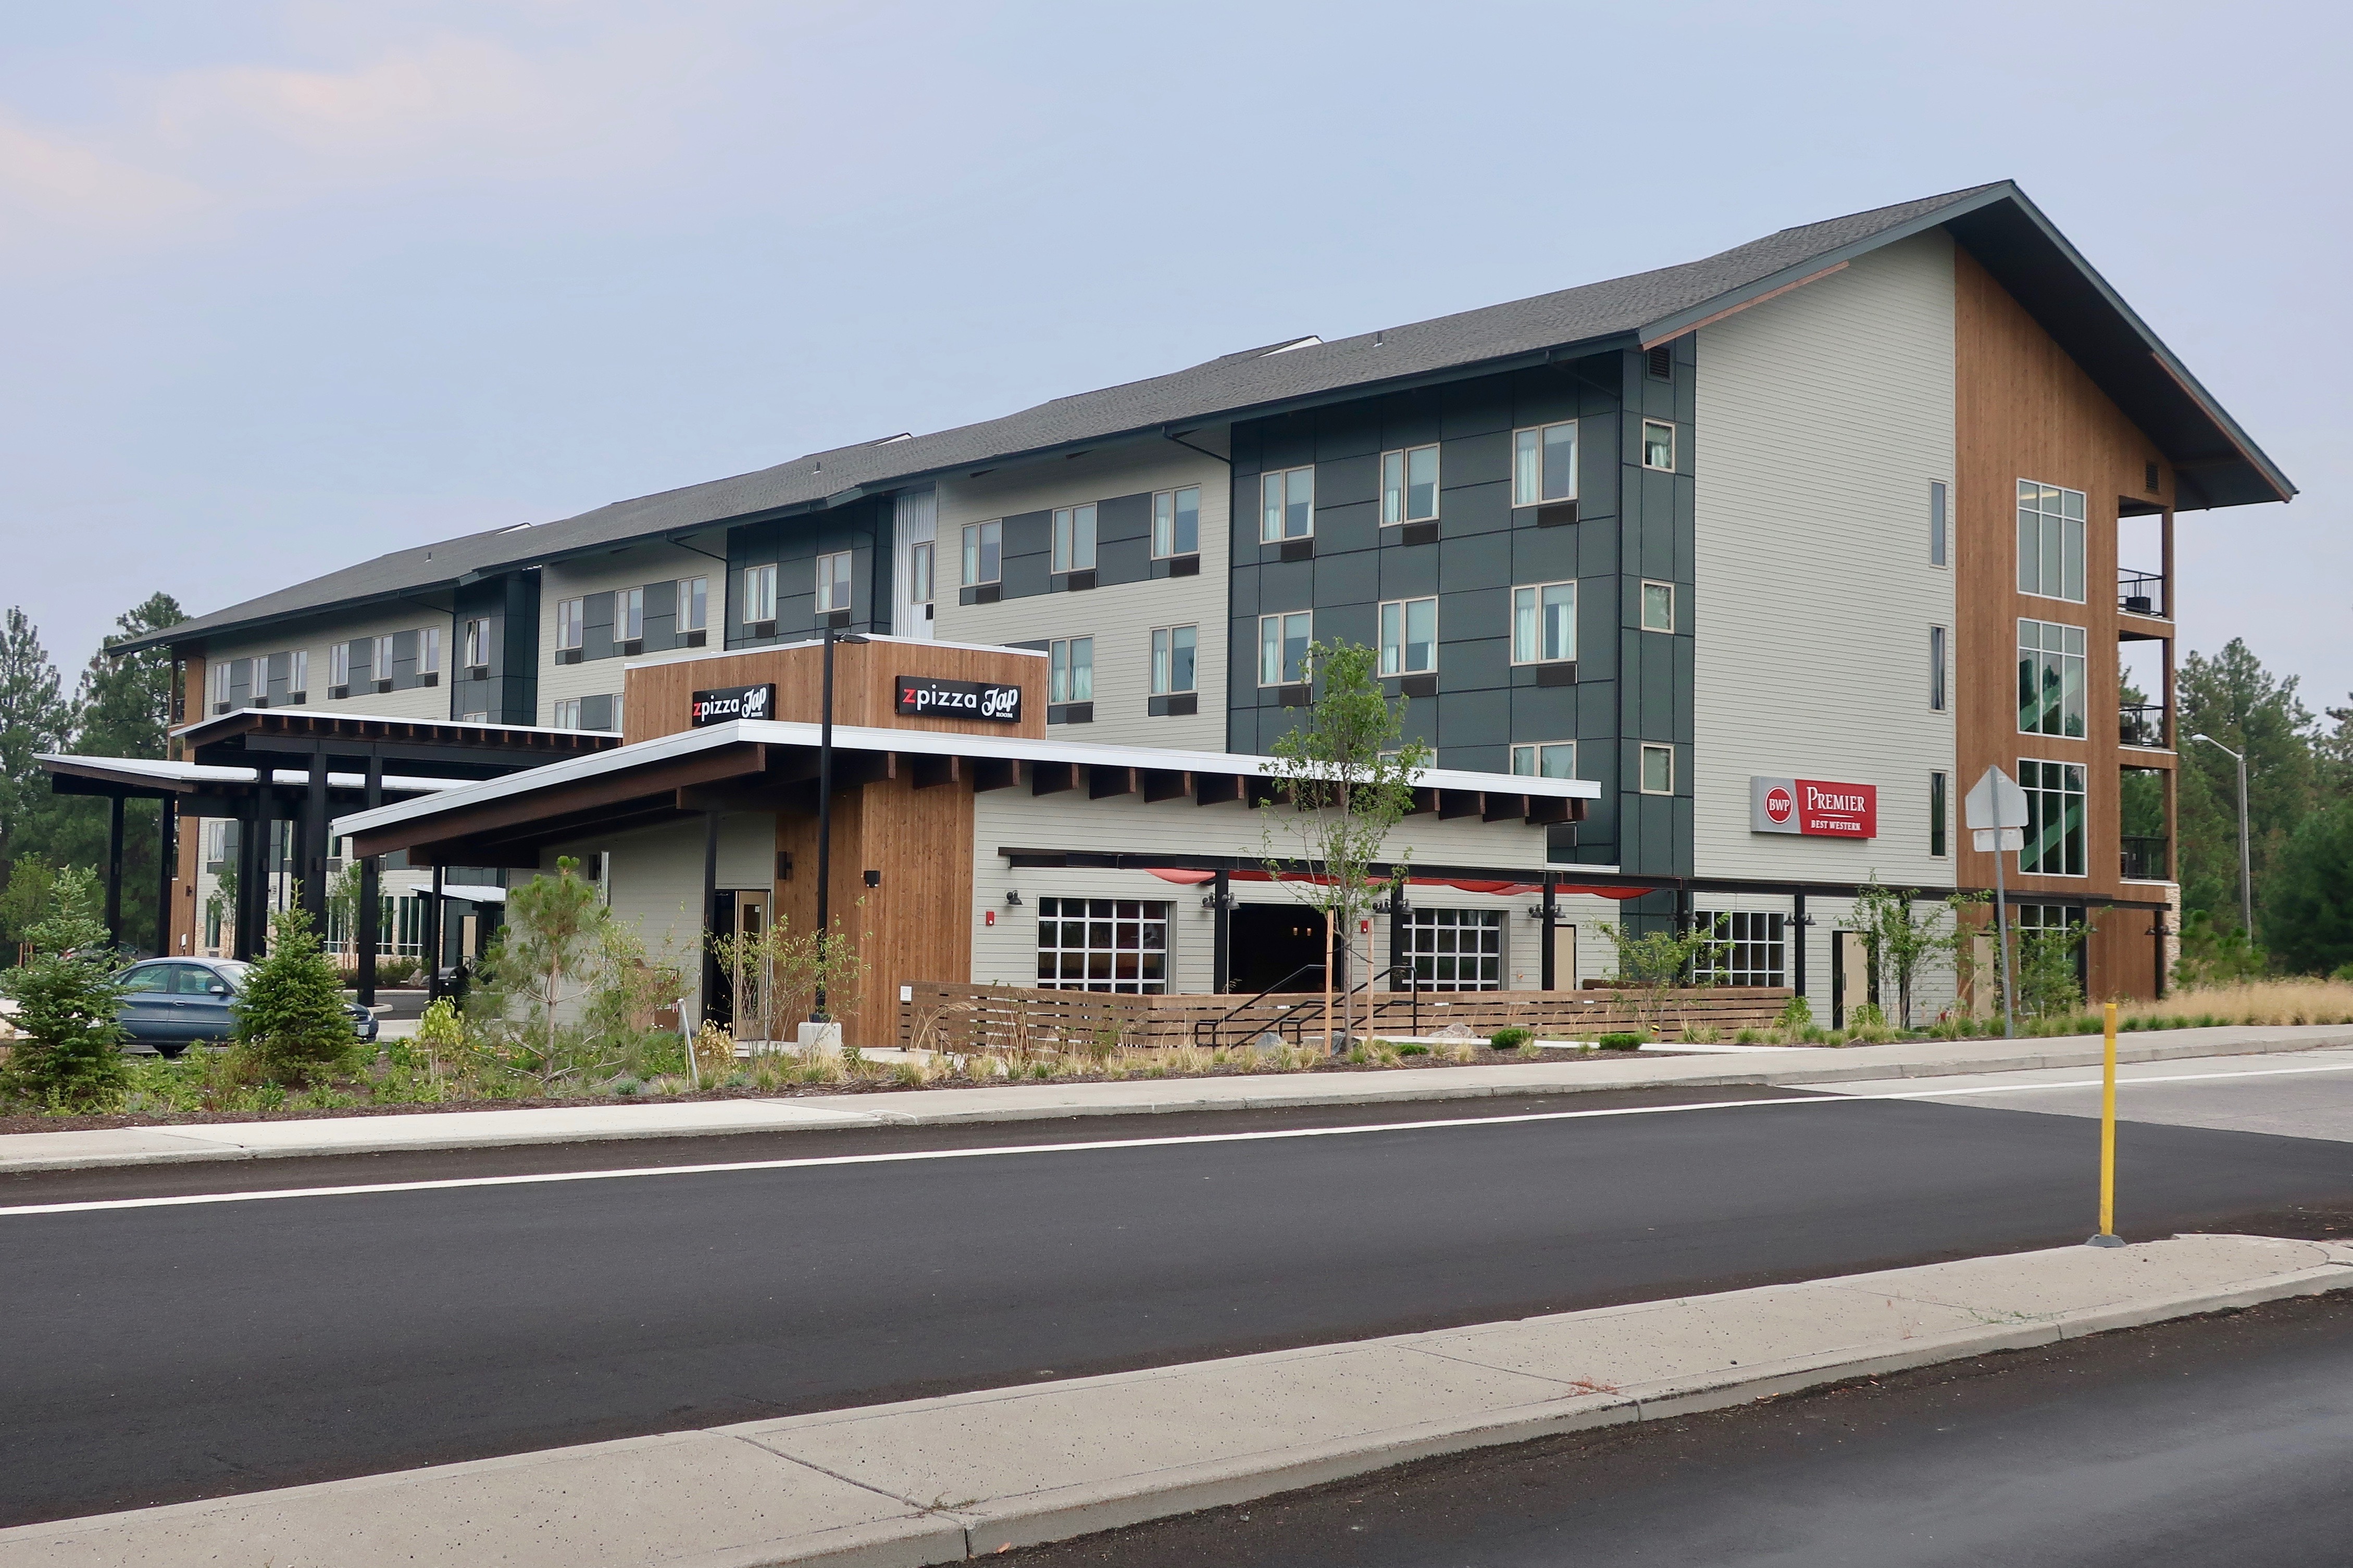 The Best Western Premier Peppertree Inn that features ZPizza Tap Room in Southwest Bend.